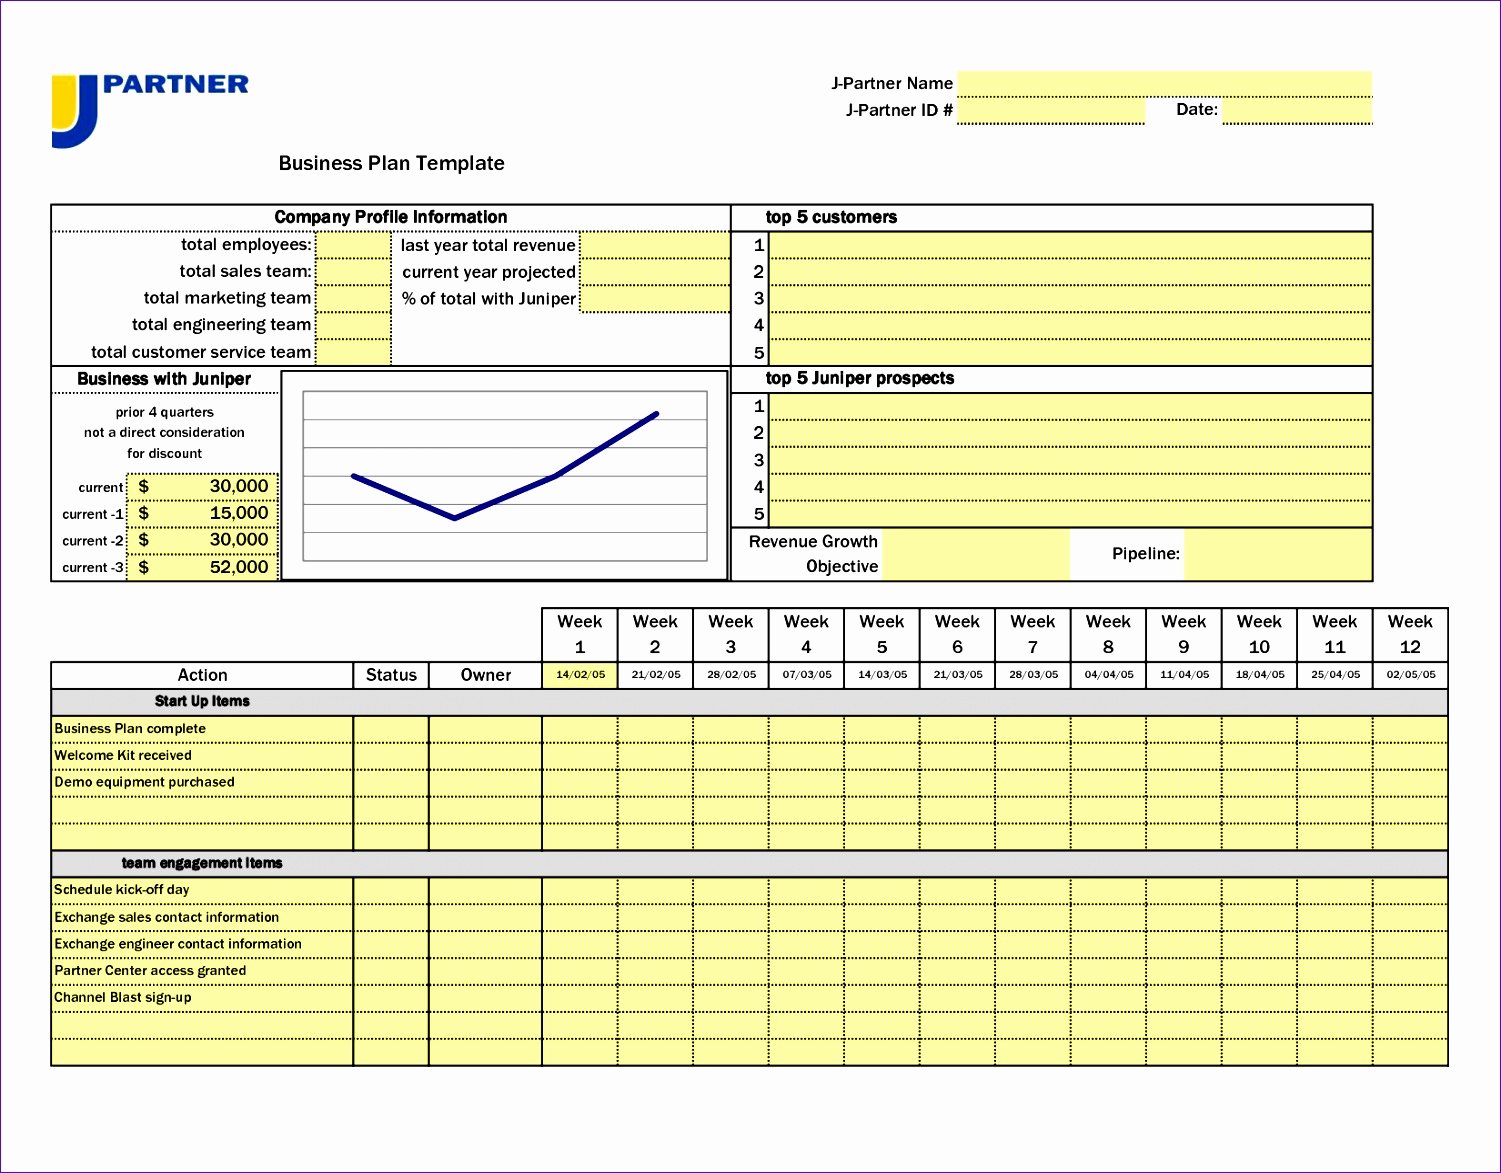 5 year business plan template excel b0925